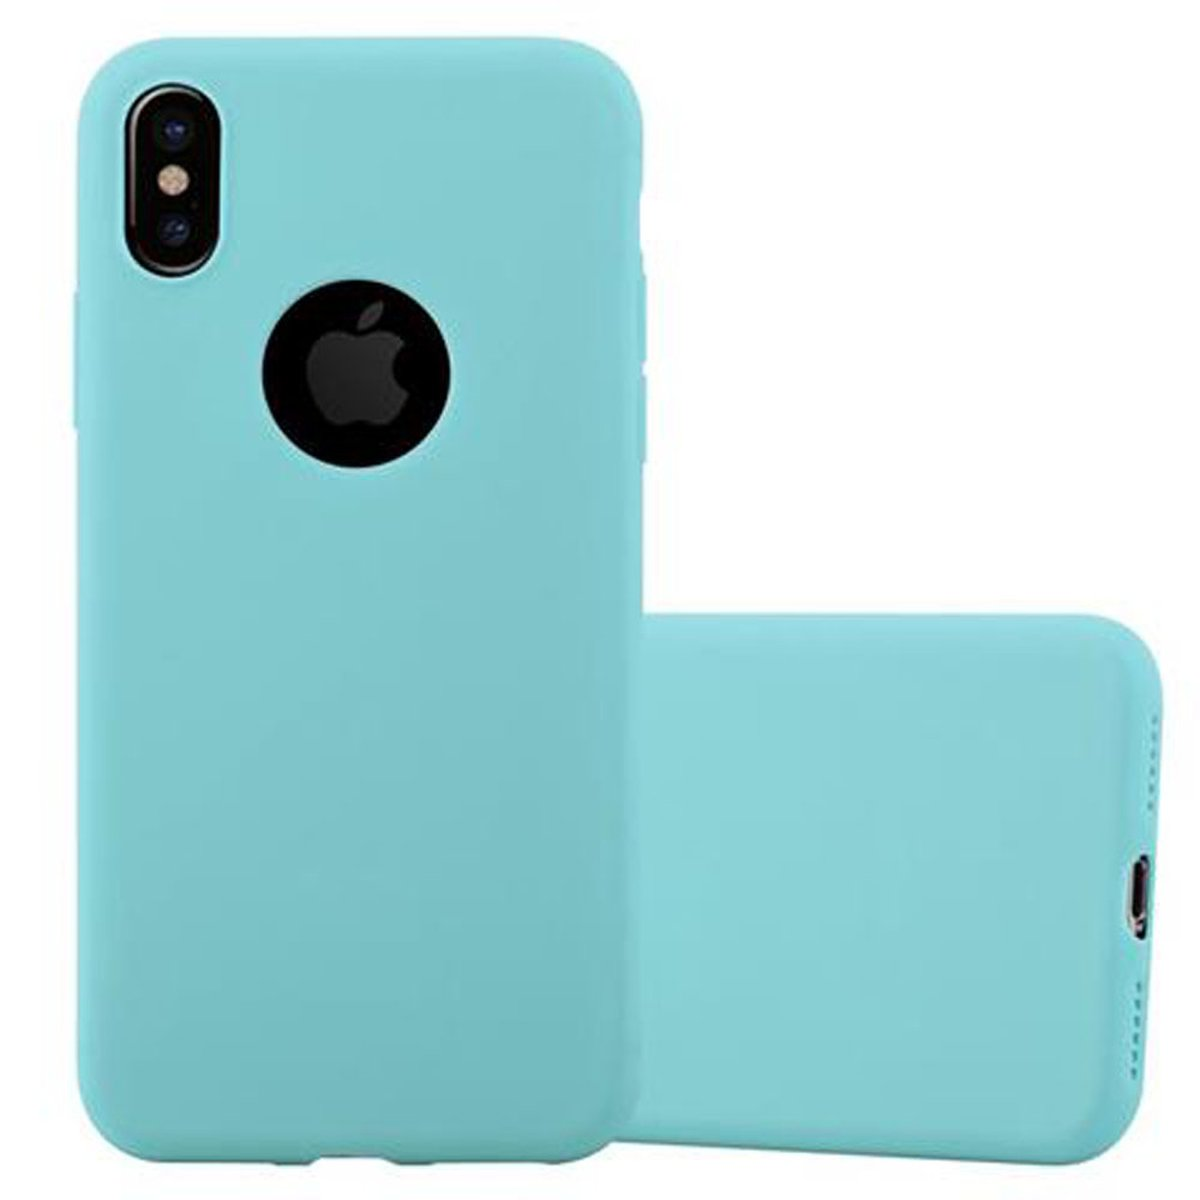 iPhone Apple, XS, / Backcover, X CANDY Candy CADORABO Hülle TPU Style, BLAU im